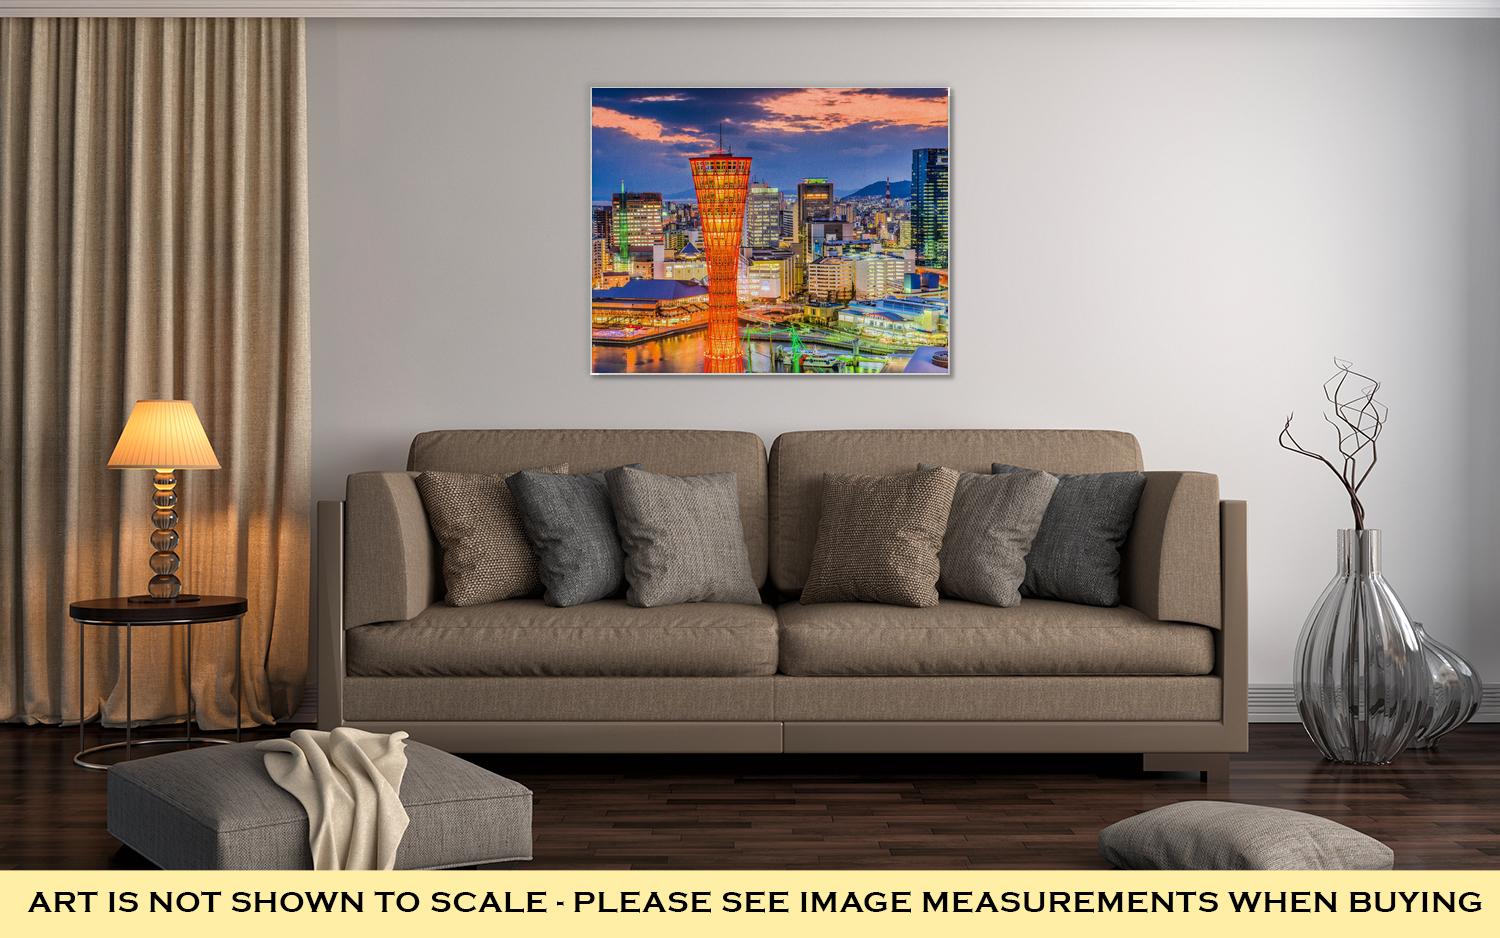 Gallery Wrapped Canvas, Kobe Japan Cityscape